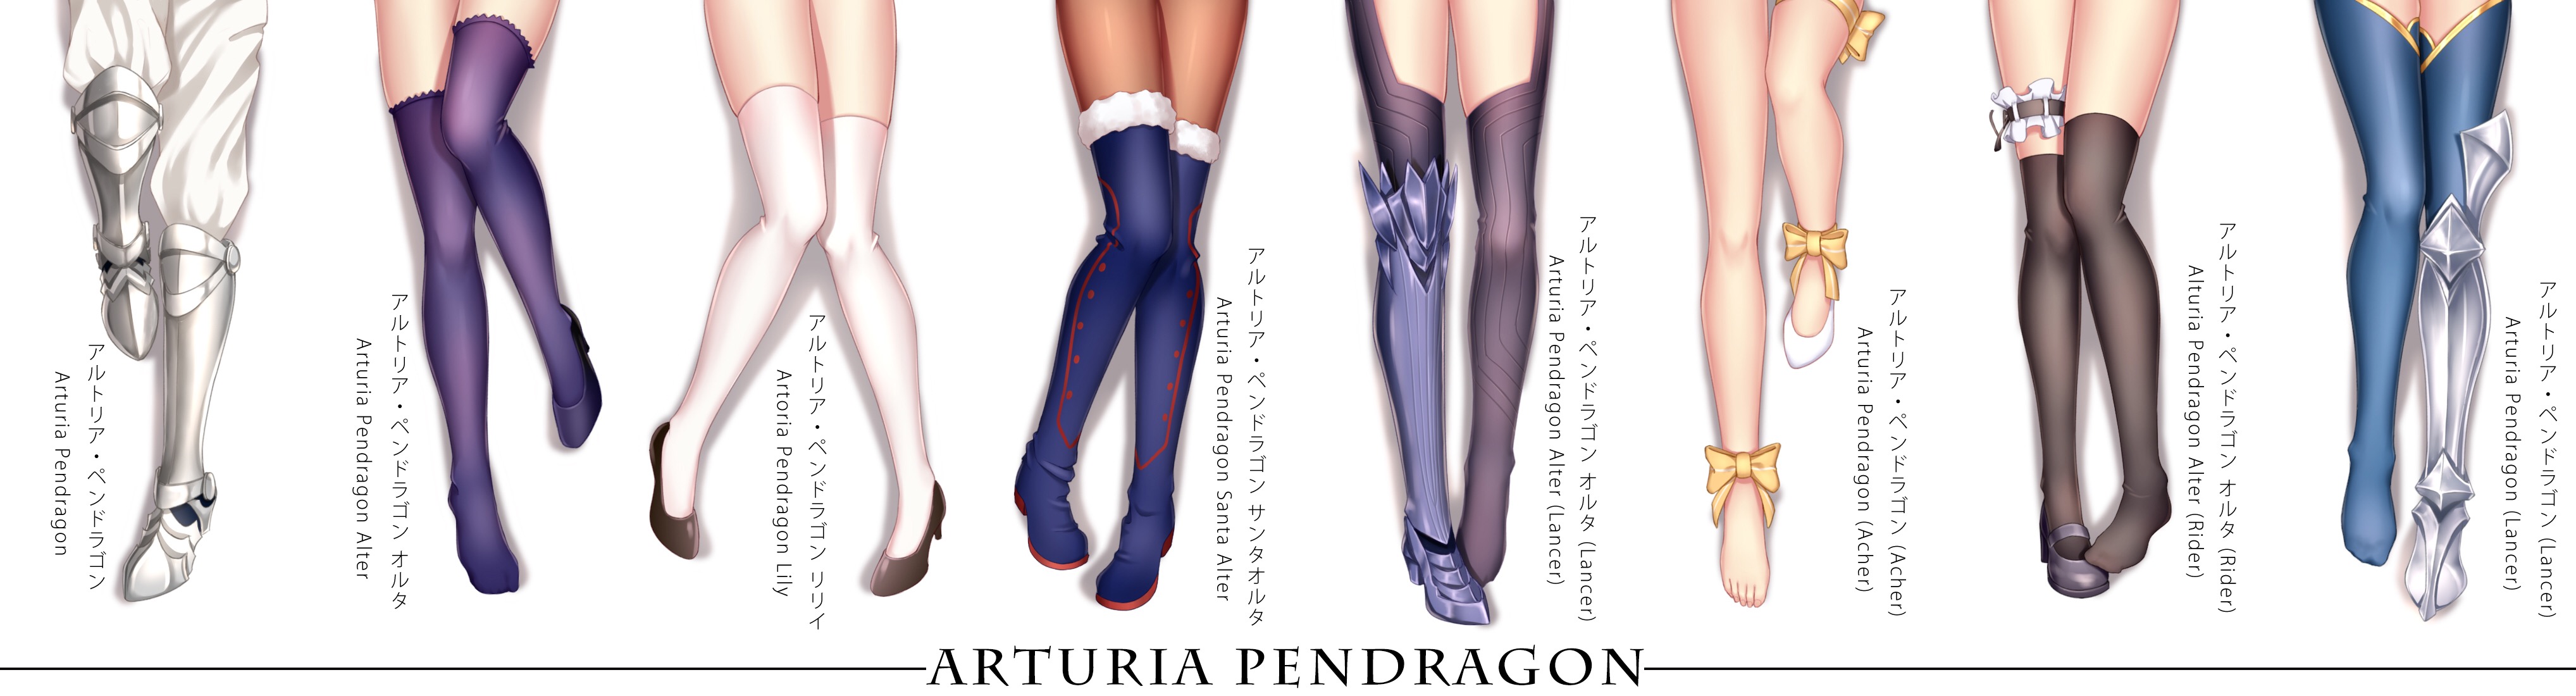 Anime 4072x1100 anime anime girls Fate/Grand Order legs Fate series Fate/Stay Night Saber Lily fantasy armor thigh-highs Artoria Pendragon (Lancer Alter) Artoria Pendragon (Lancer) Artoria Pendragon Saber Saber Alter Geduan Artoria Pendragon(Rider)